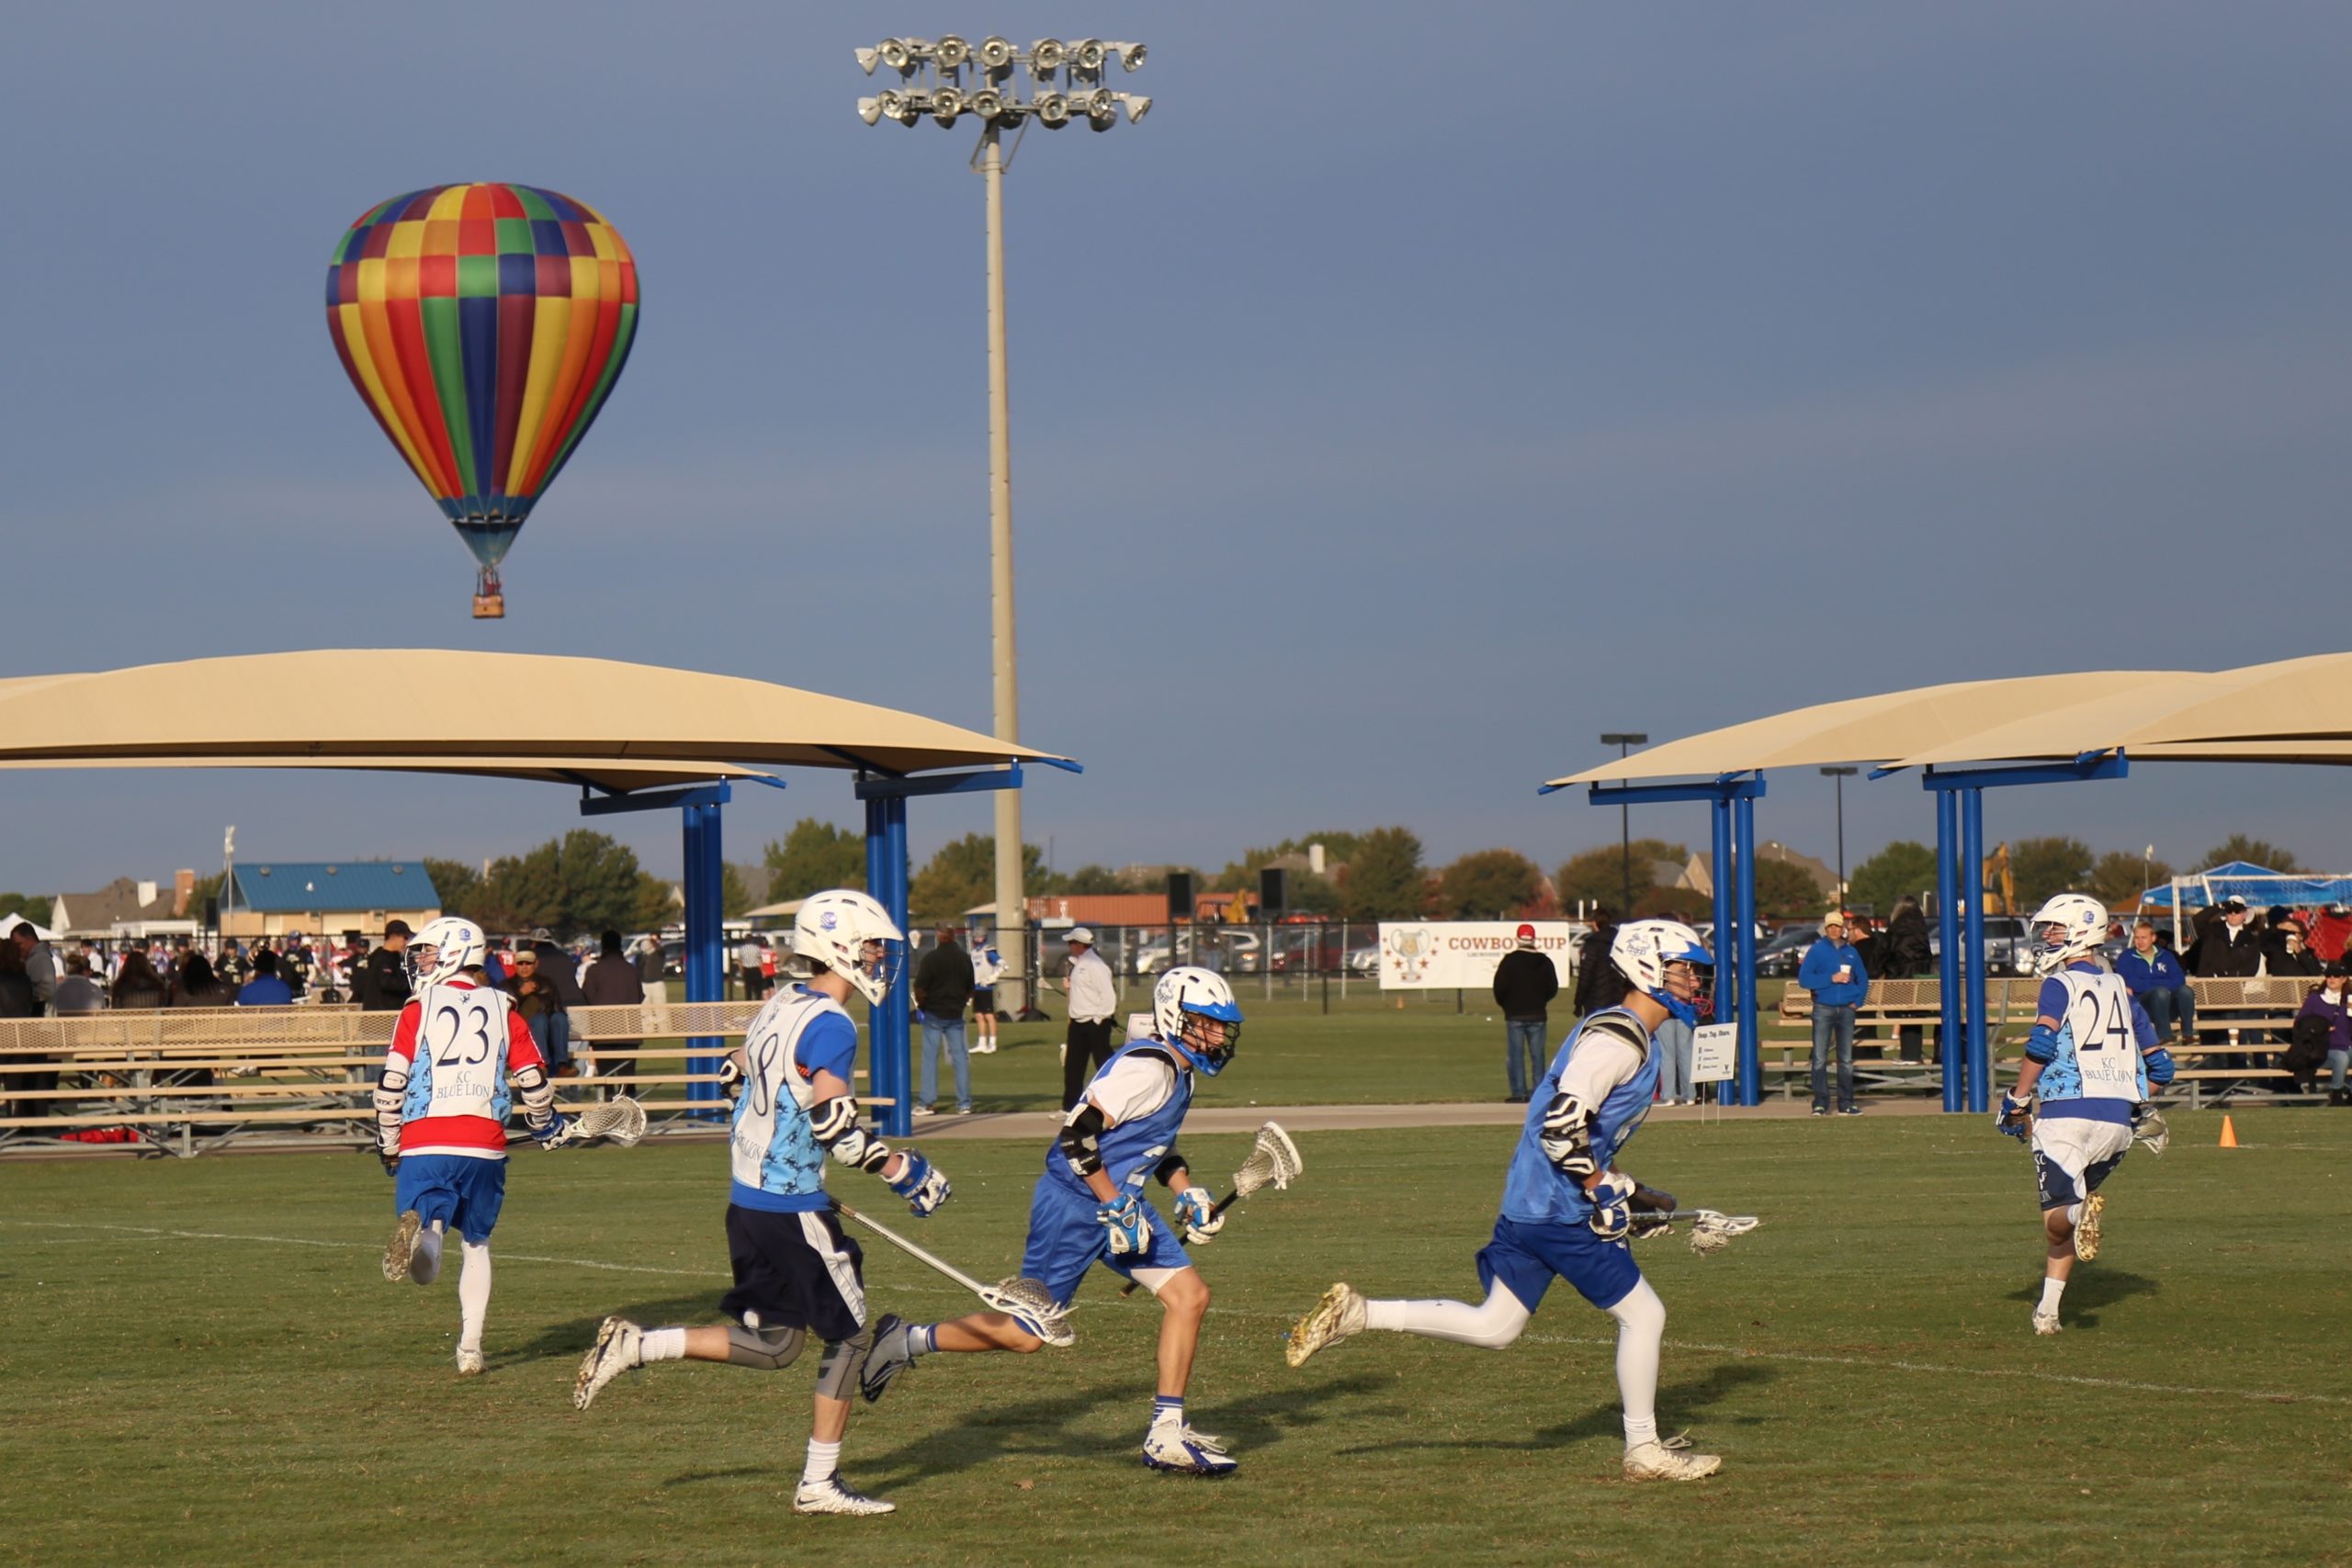 Lacrosse at Russell Creek Park in Plano with players and a hote air balloon in the air